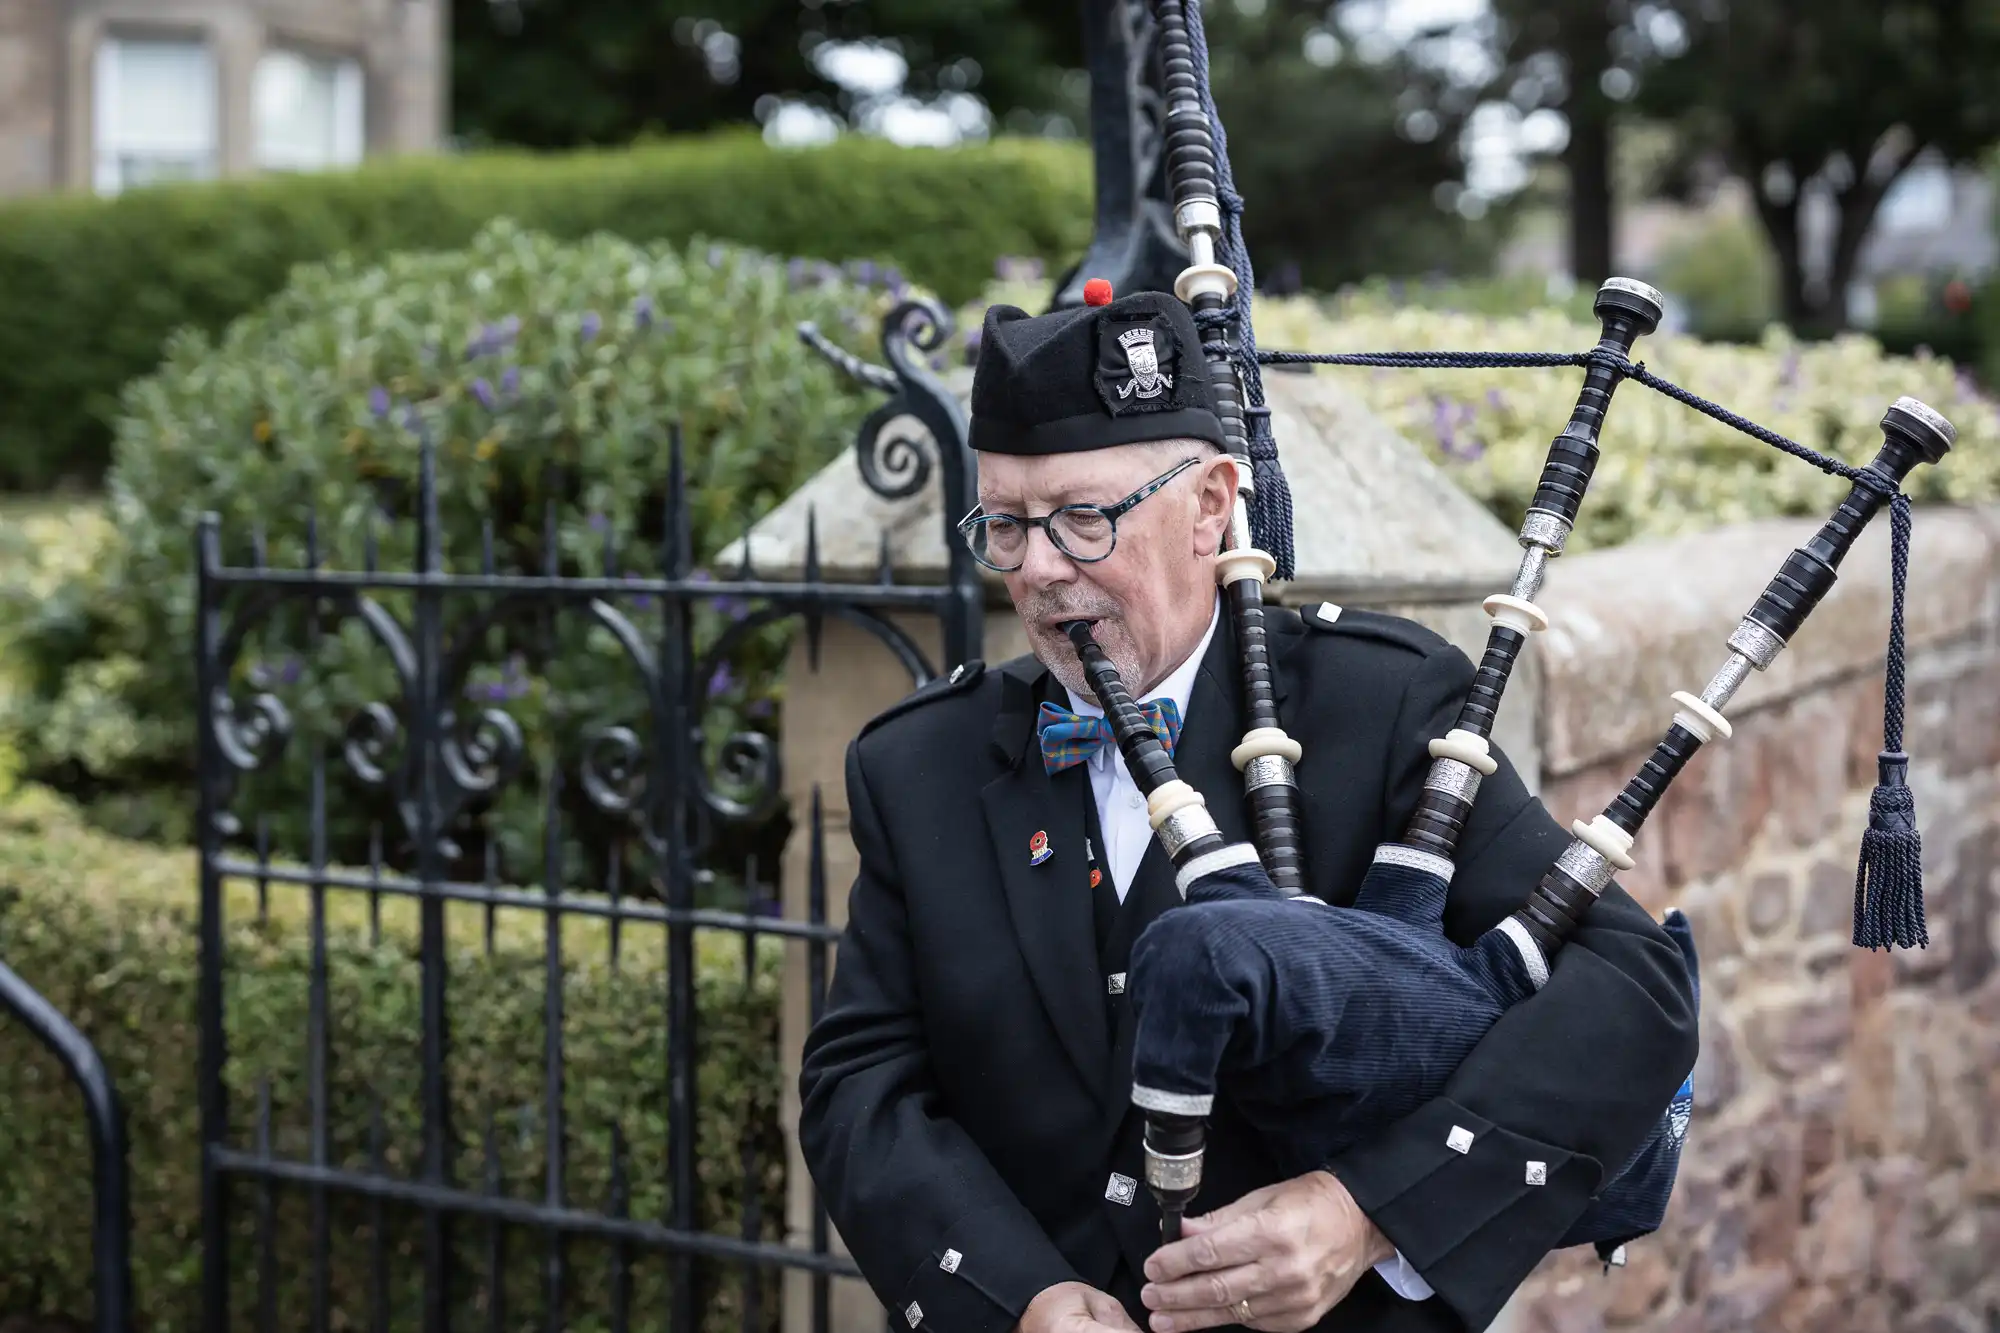 A man in traditional Scottish attire playing bagpipes outdoors near a metal fence and flowerbeds.